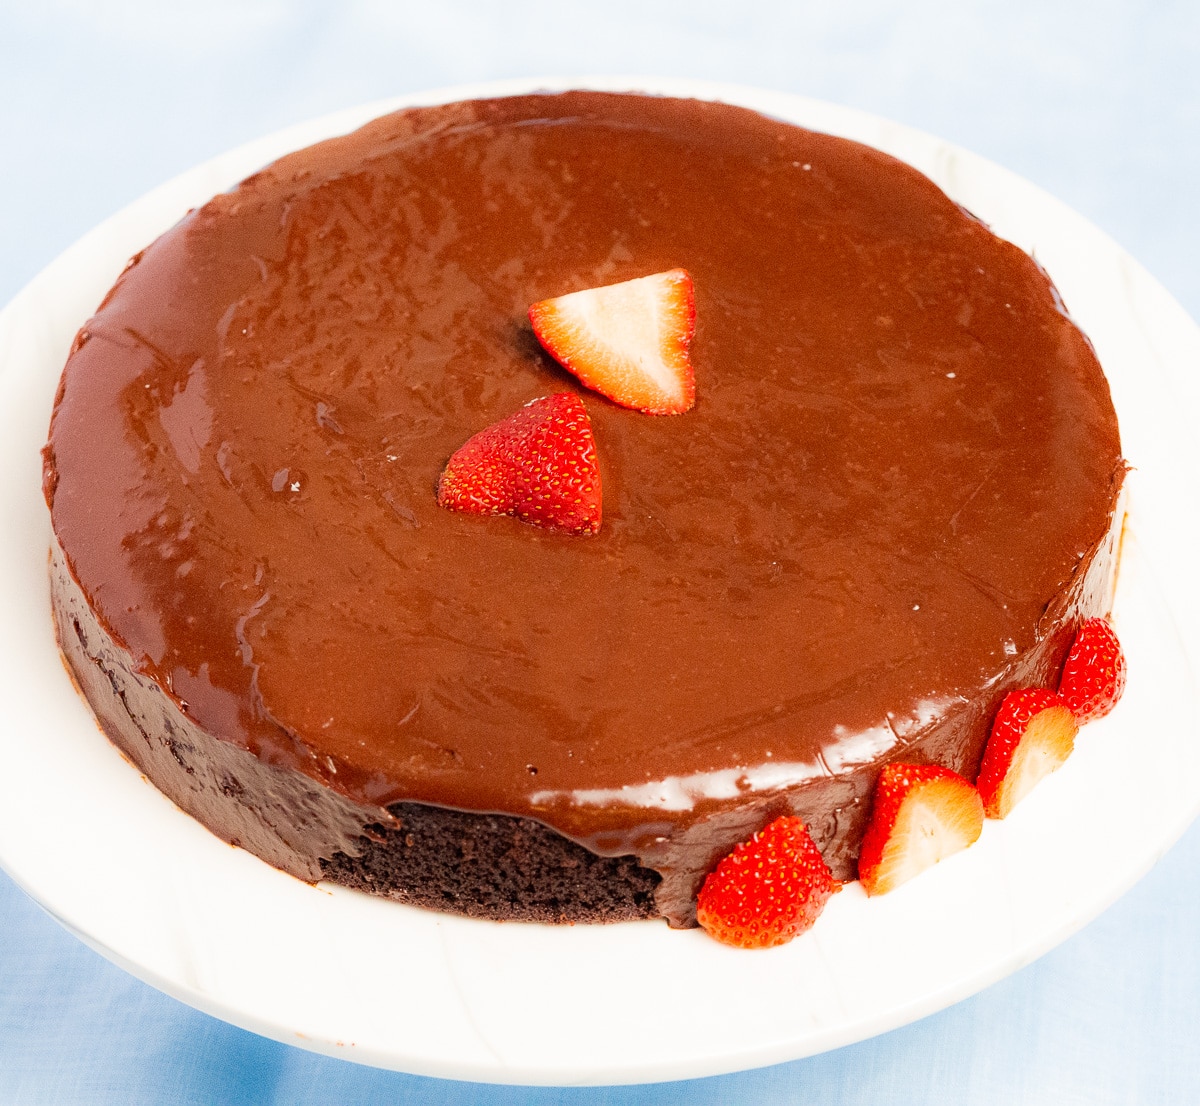 Chocolate fudge cake on a white cake stand  adorn with slices of strawberries.